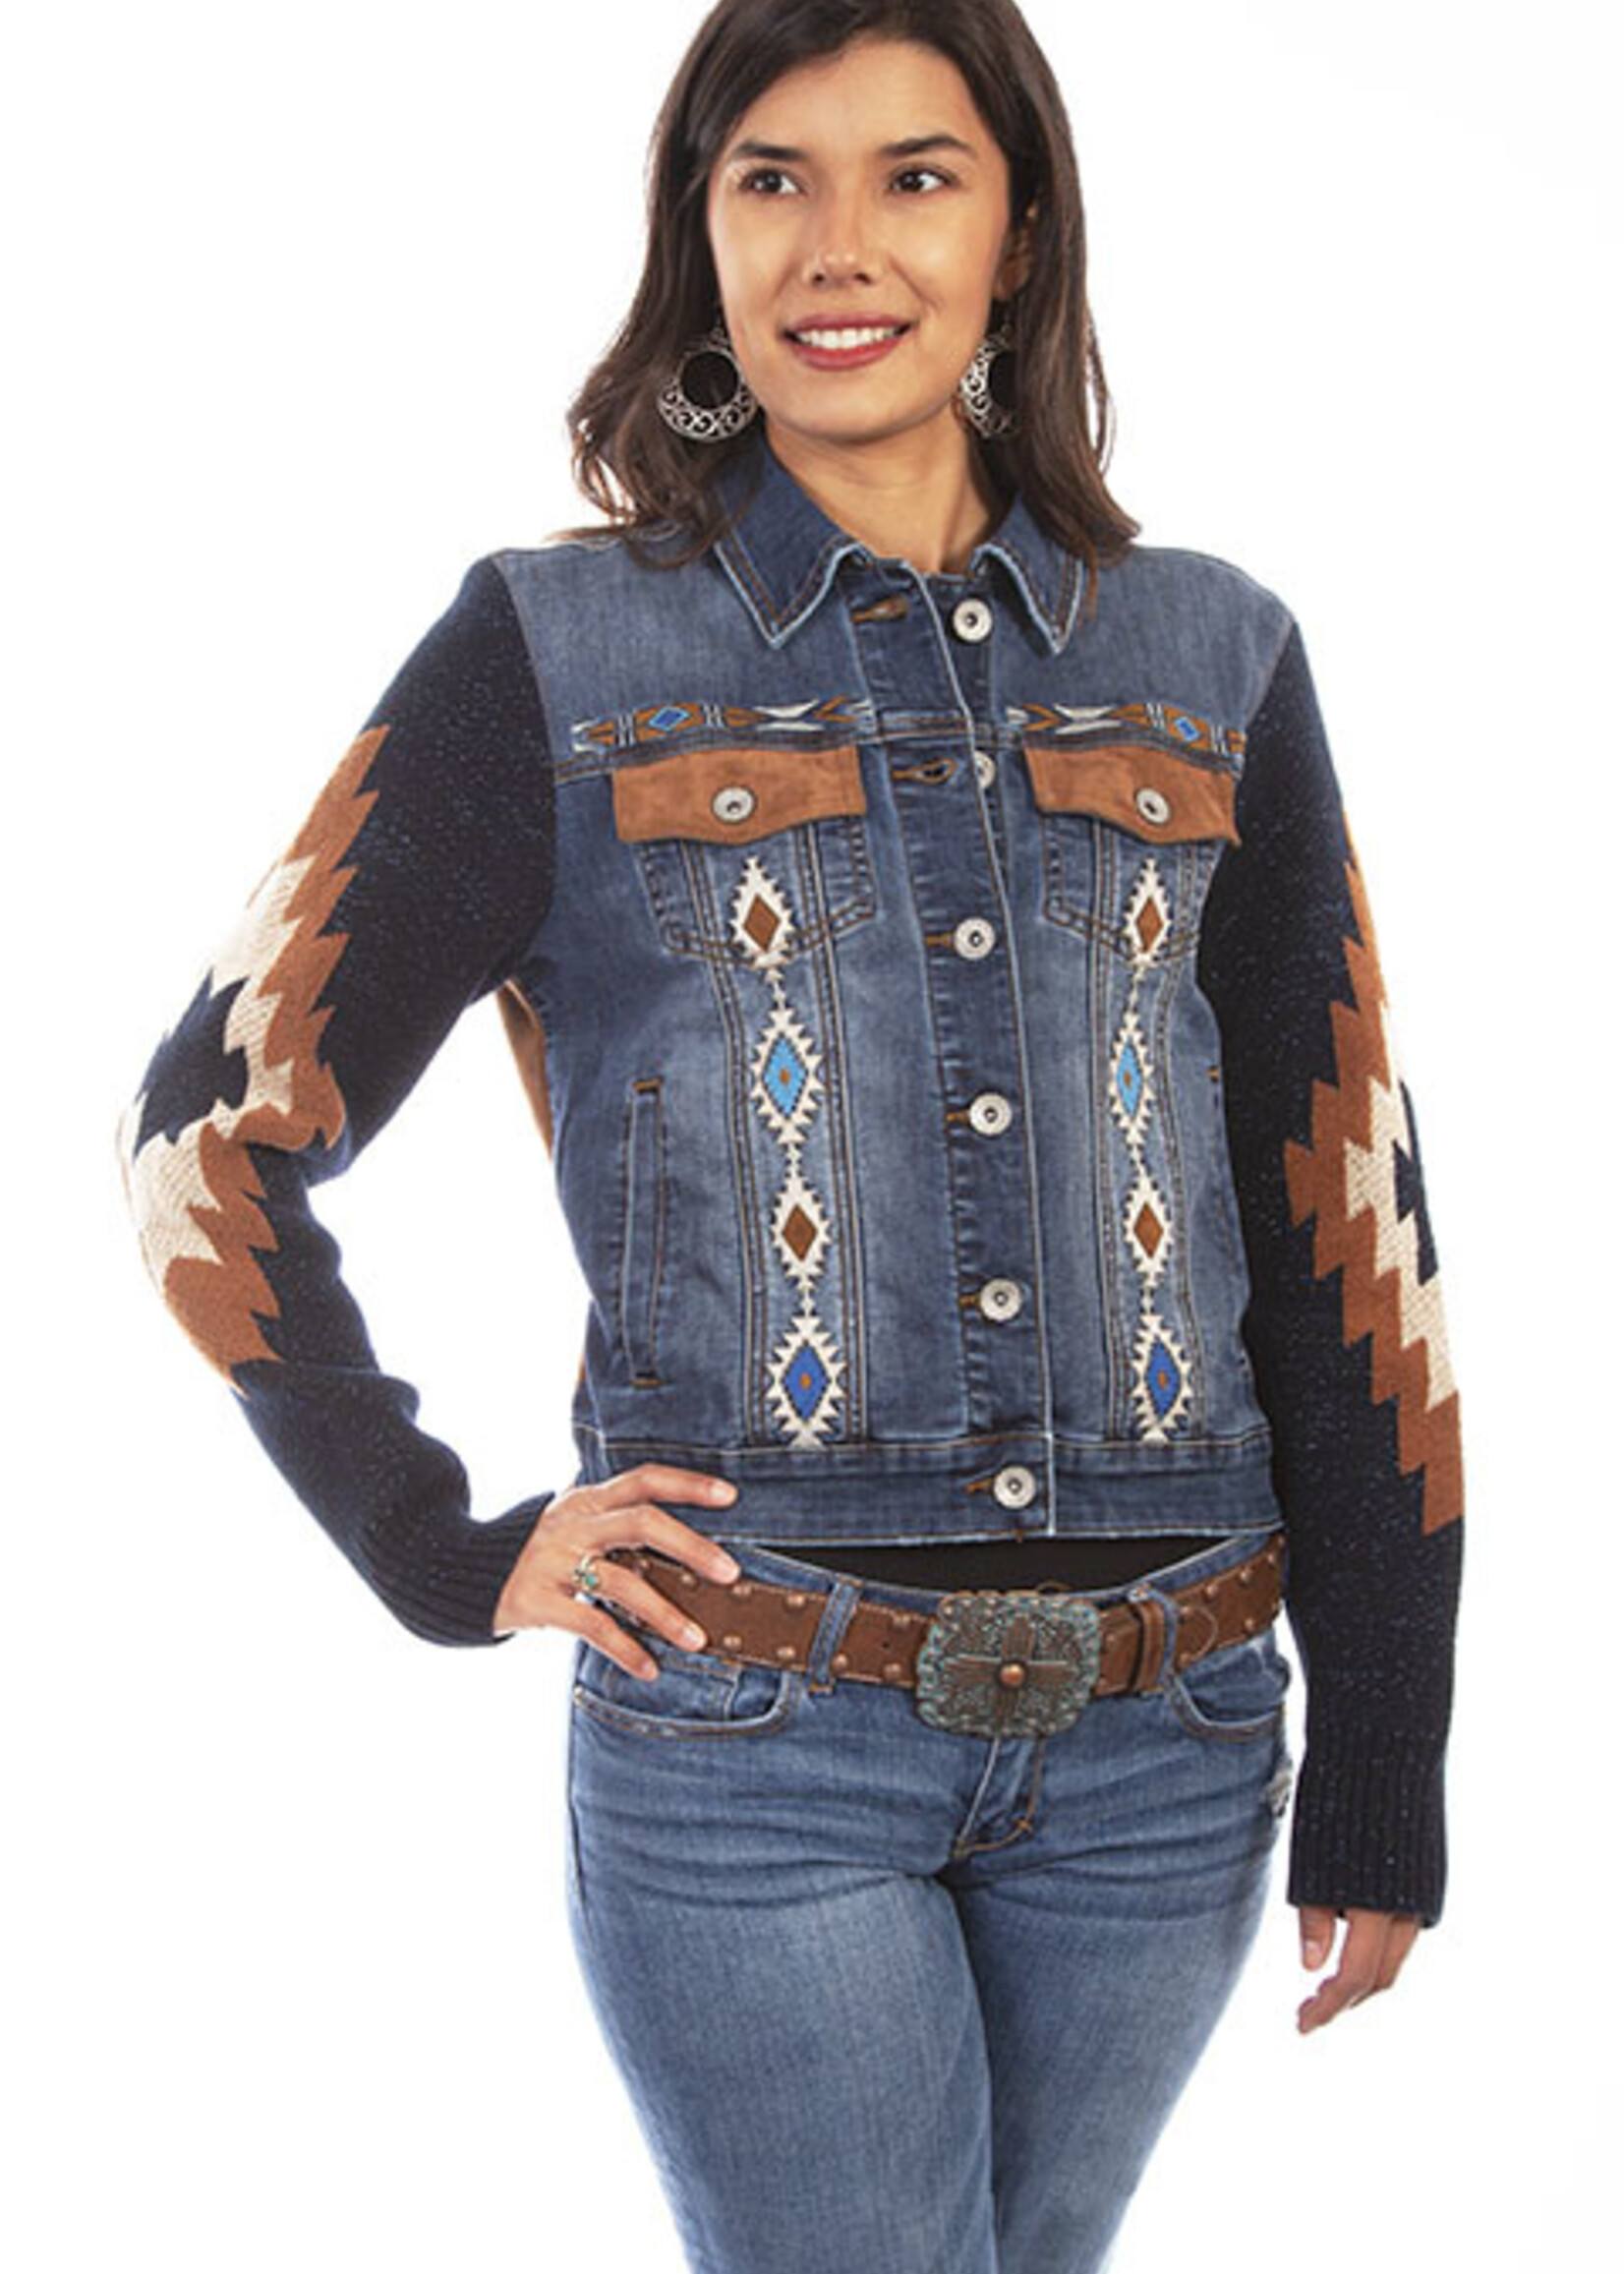 Scully Aztec Sweater Sleeve Jacket